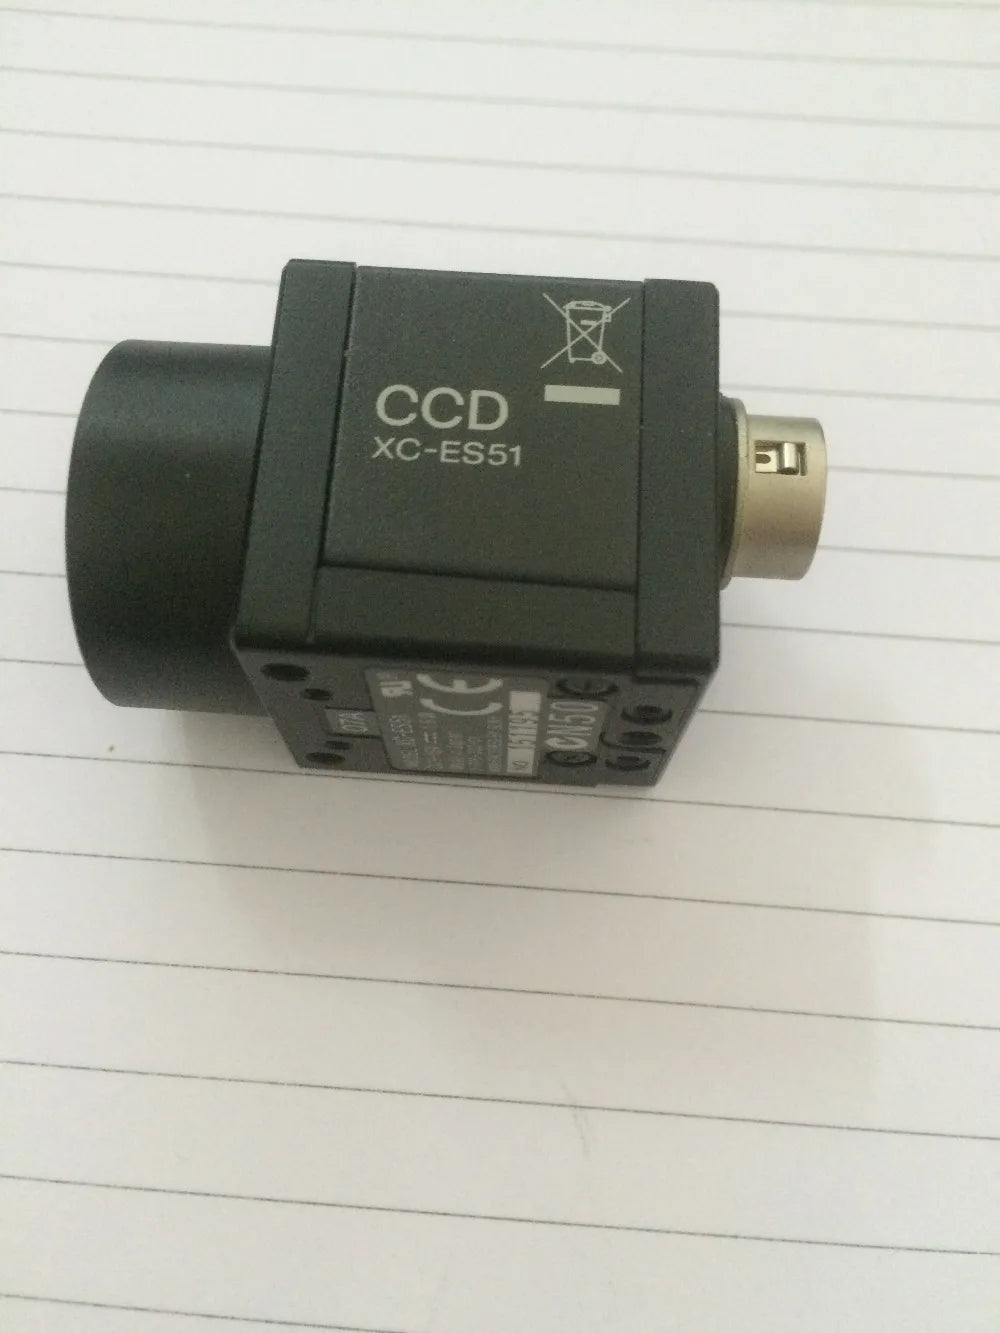 XC-ES51 CCD used in good condition